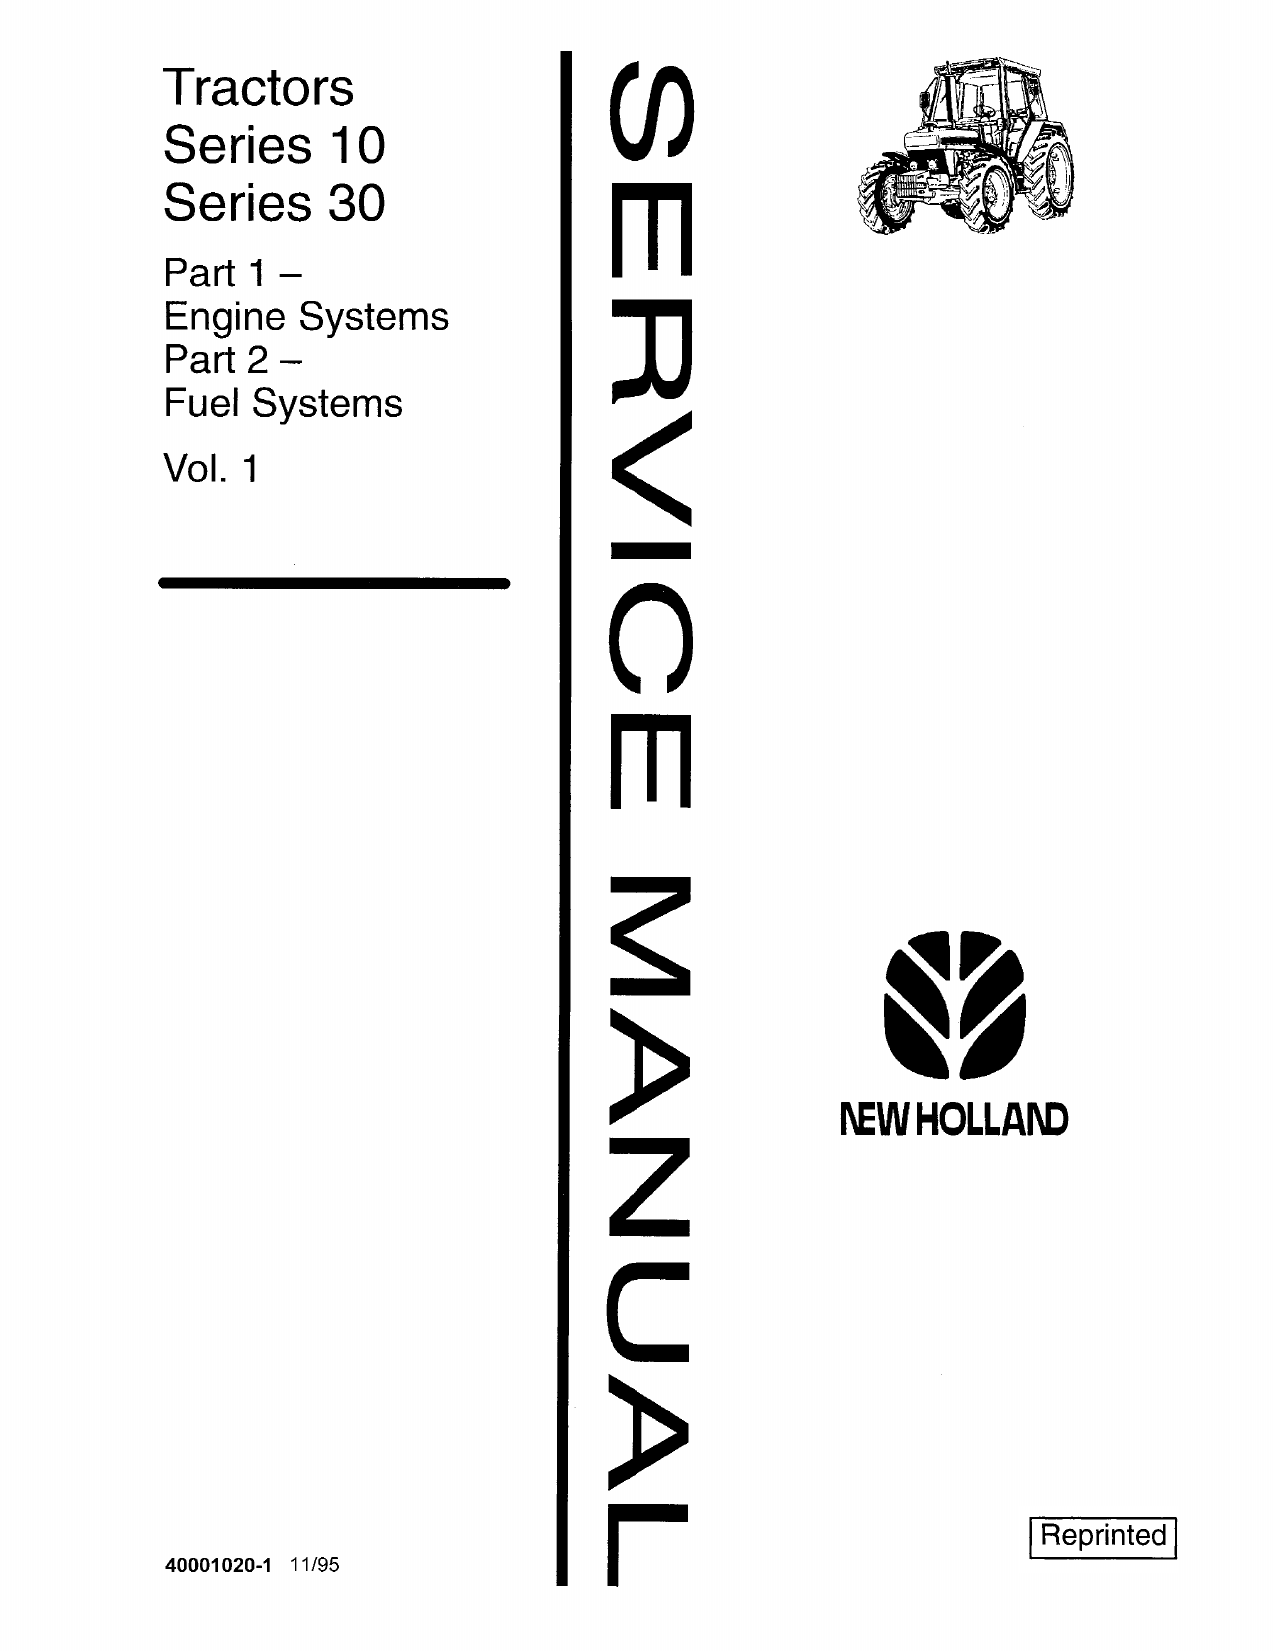 New Holland 3930 utility tractor manual Preview image 2